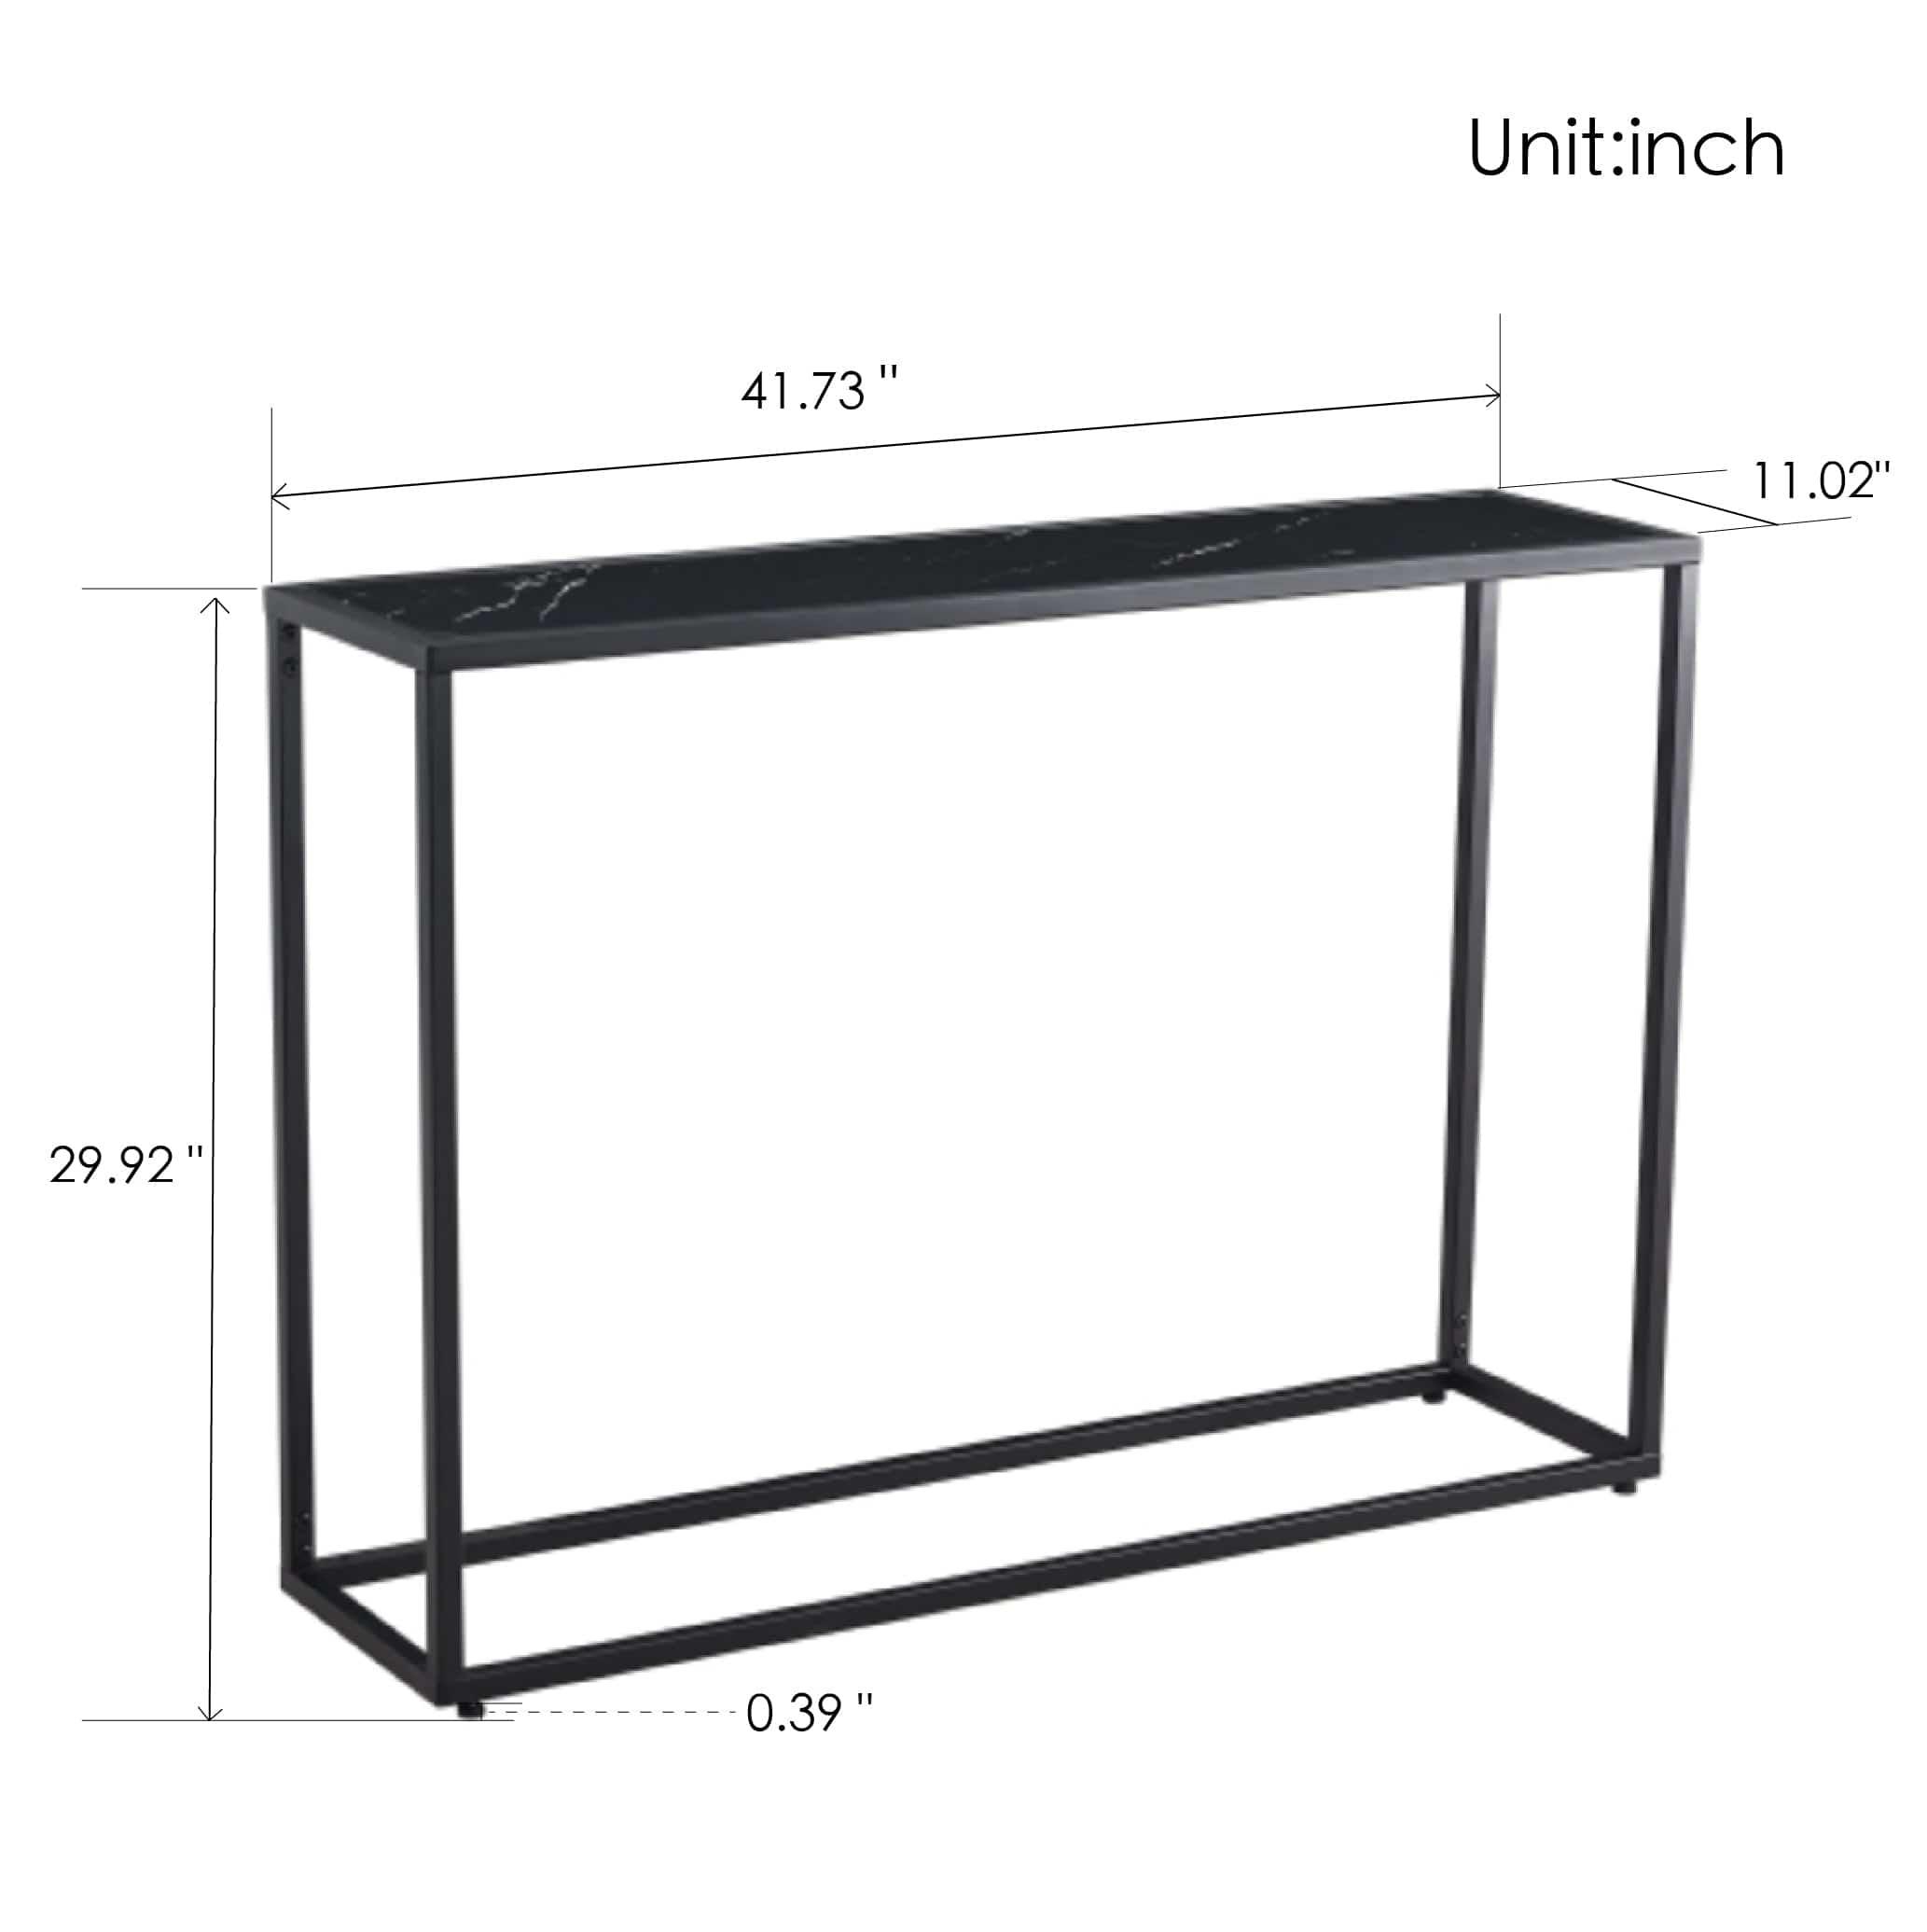 Shop D&N Console Talbe Minimalist Porch Table Sofa sidetable, MDF boards, metal frame , Rectangle shape, Black,41.73''L 11.2''W 29.92''H Mademoiselle Home Decor